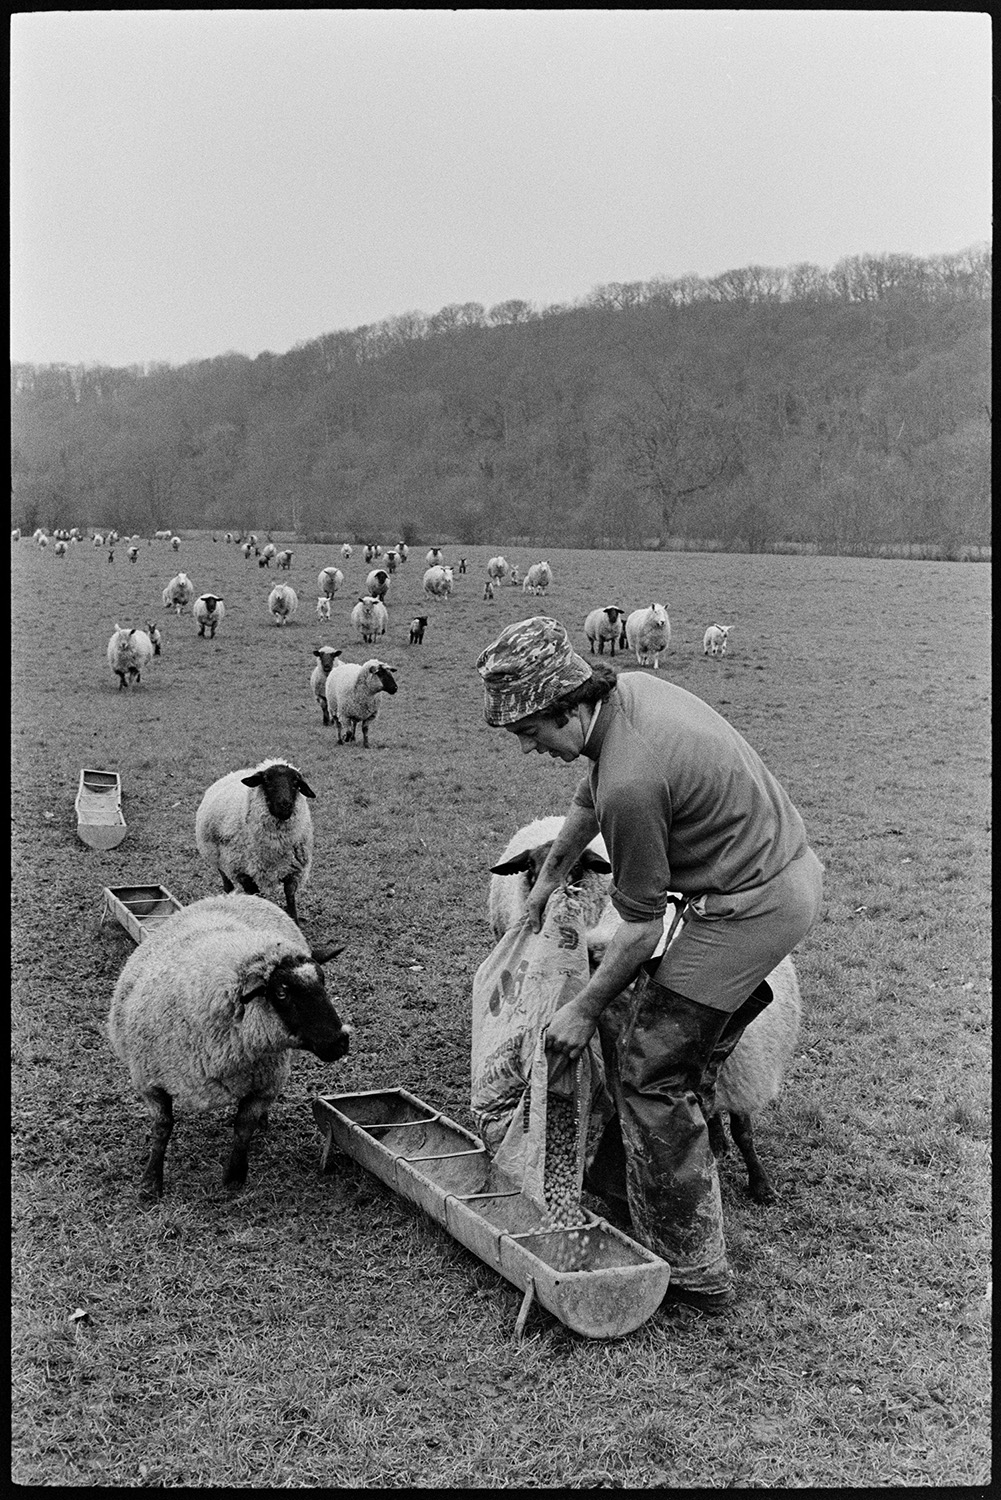 Sorting ewes and lambs in pen and feeding them. 
[Graham Ward feeding lambs and ewes in a field at Parsonage, Iddesleigh. He is empting a sack of feed into a trough.]